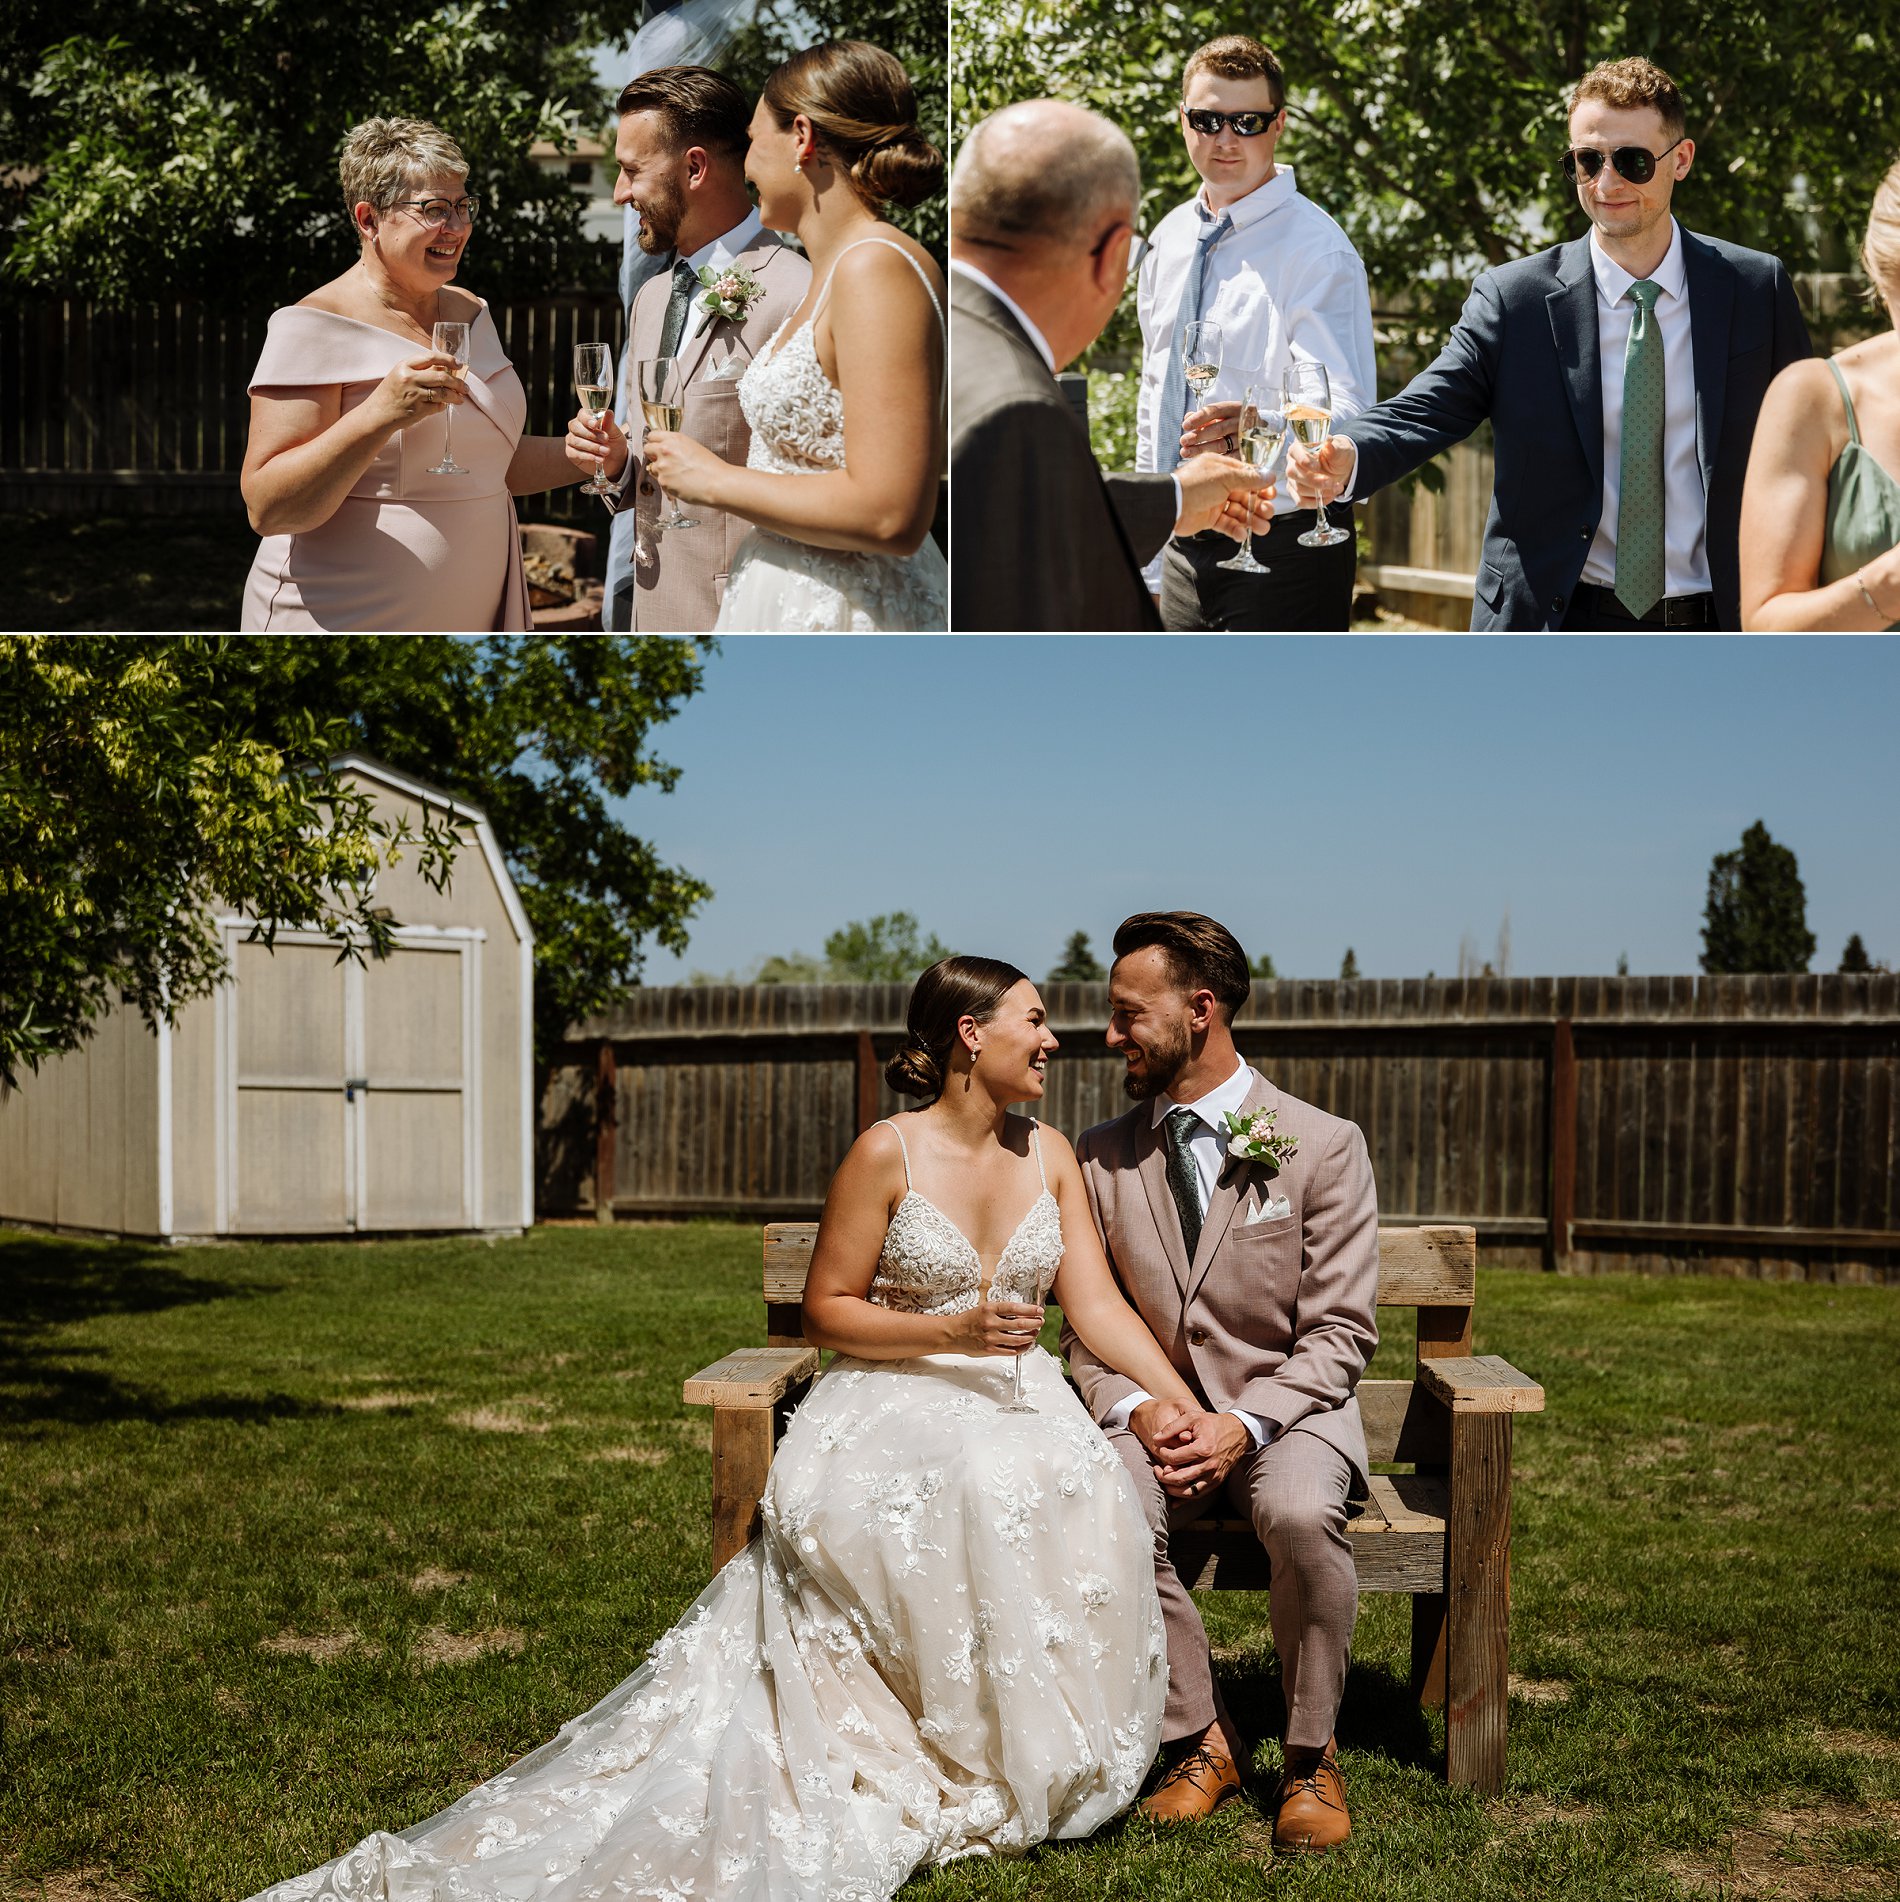 Saskatoon bride and groom share champagne with their family at their backyard wedding reception.